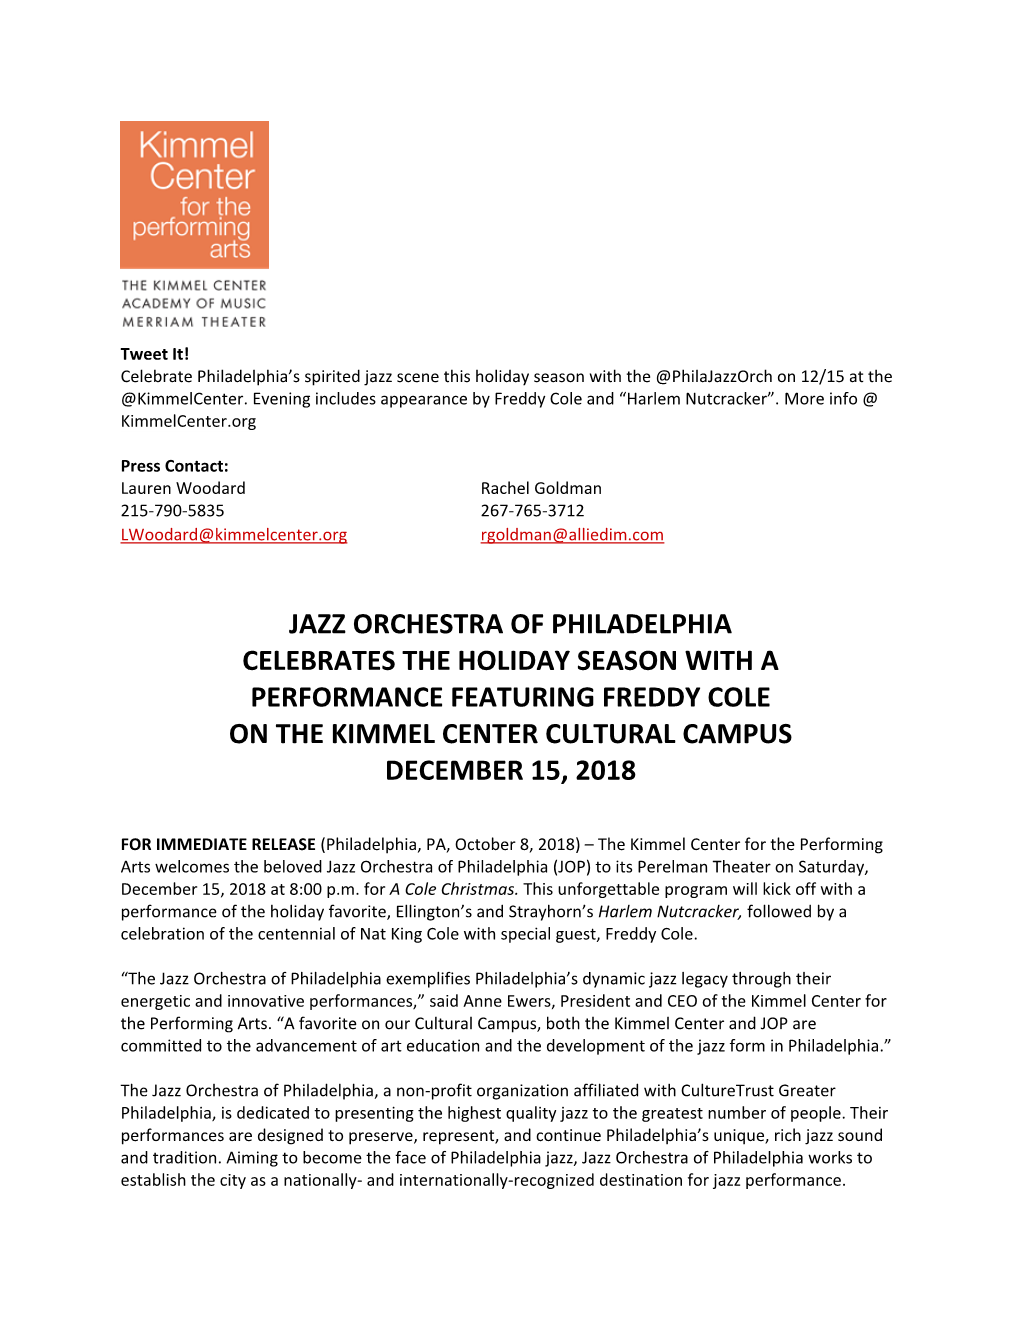 Jazz Orchestra of Philadelphia Celebrates the Holiday Season with a Performance Featuring Freddy Cole on the Kimmel Center Cultural Campus December 15, 2018